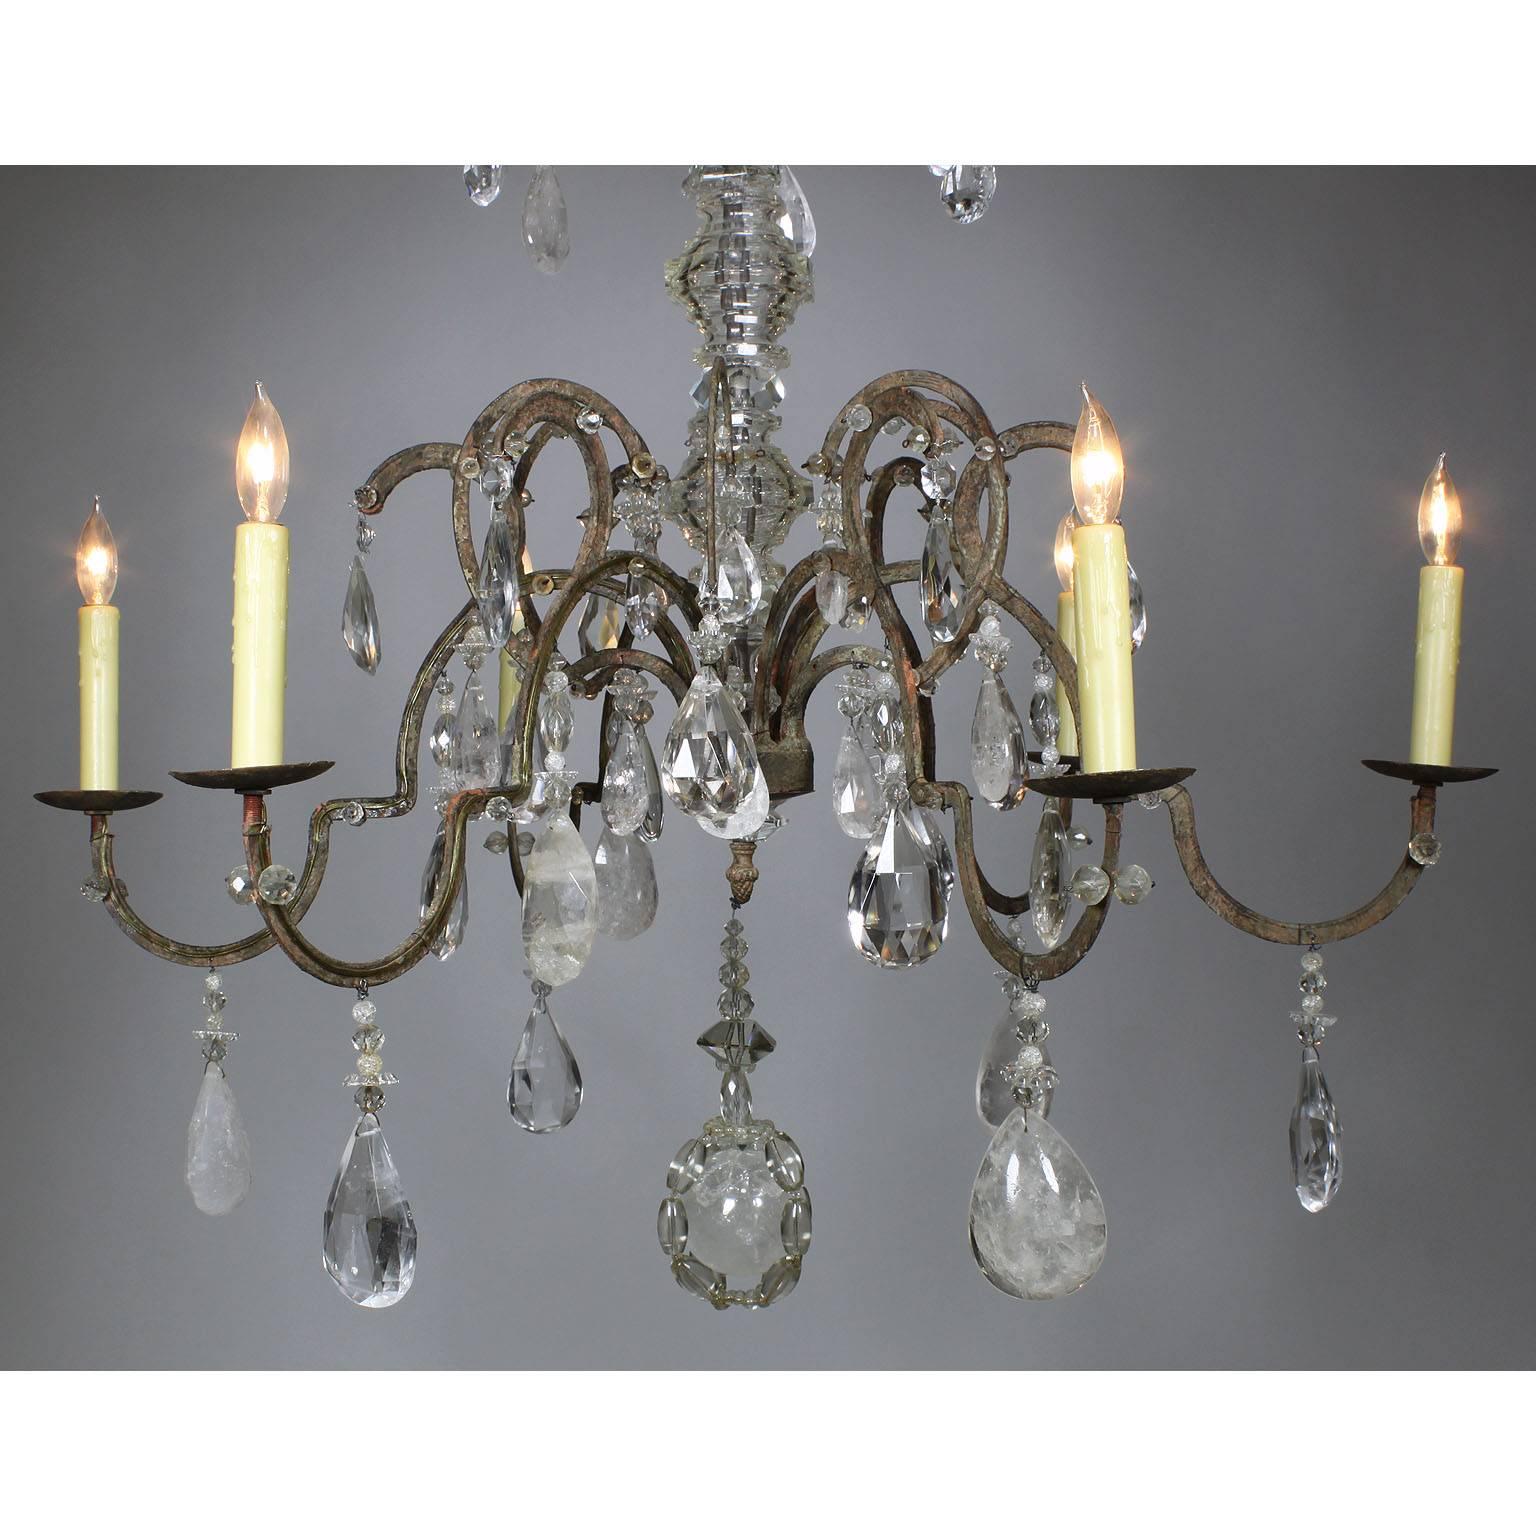 Carved Rare French 19th-20th Century Louis XV Style Metal and Rock-Crystal Chandelier